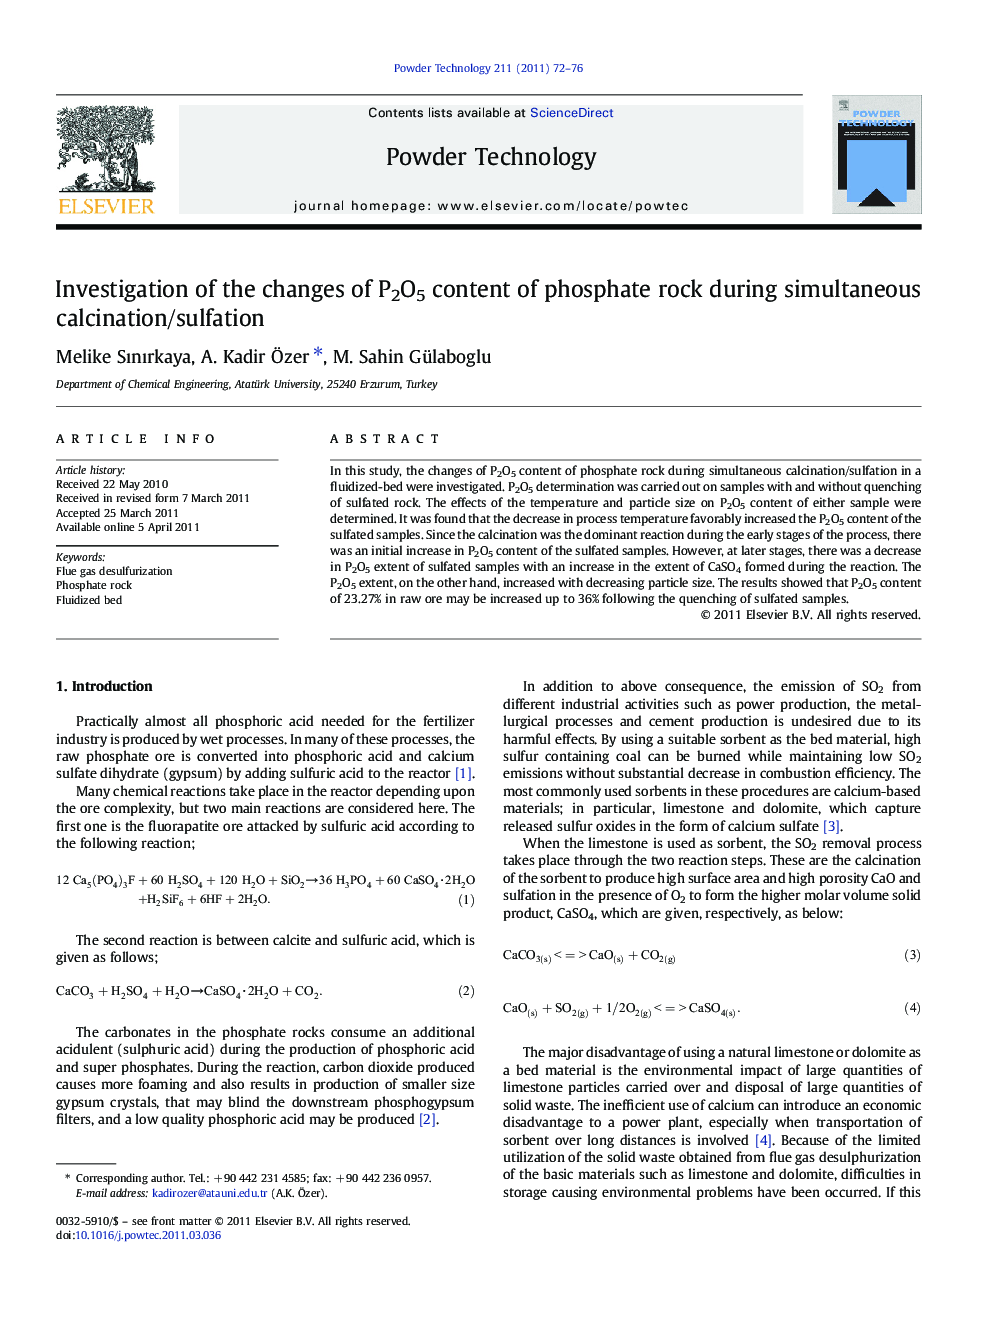 Investigation of the changes of P2O5 content of phosphate rock during simultaneous calcination/sulfation